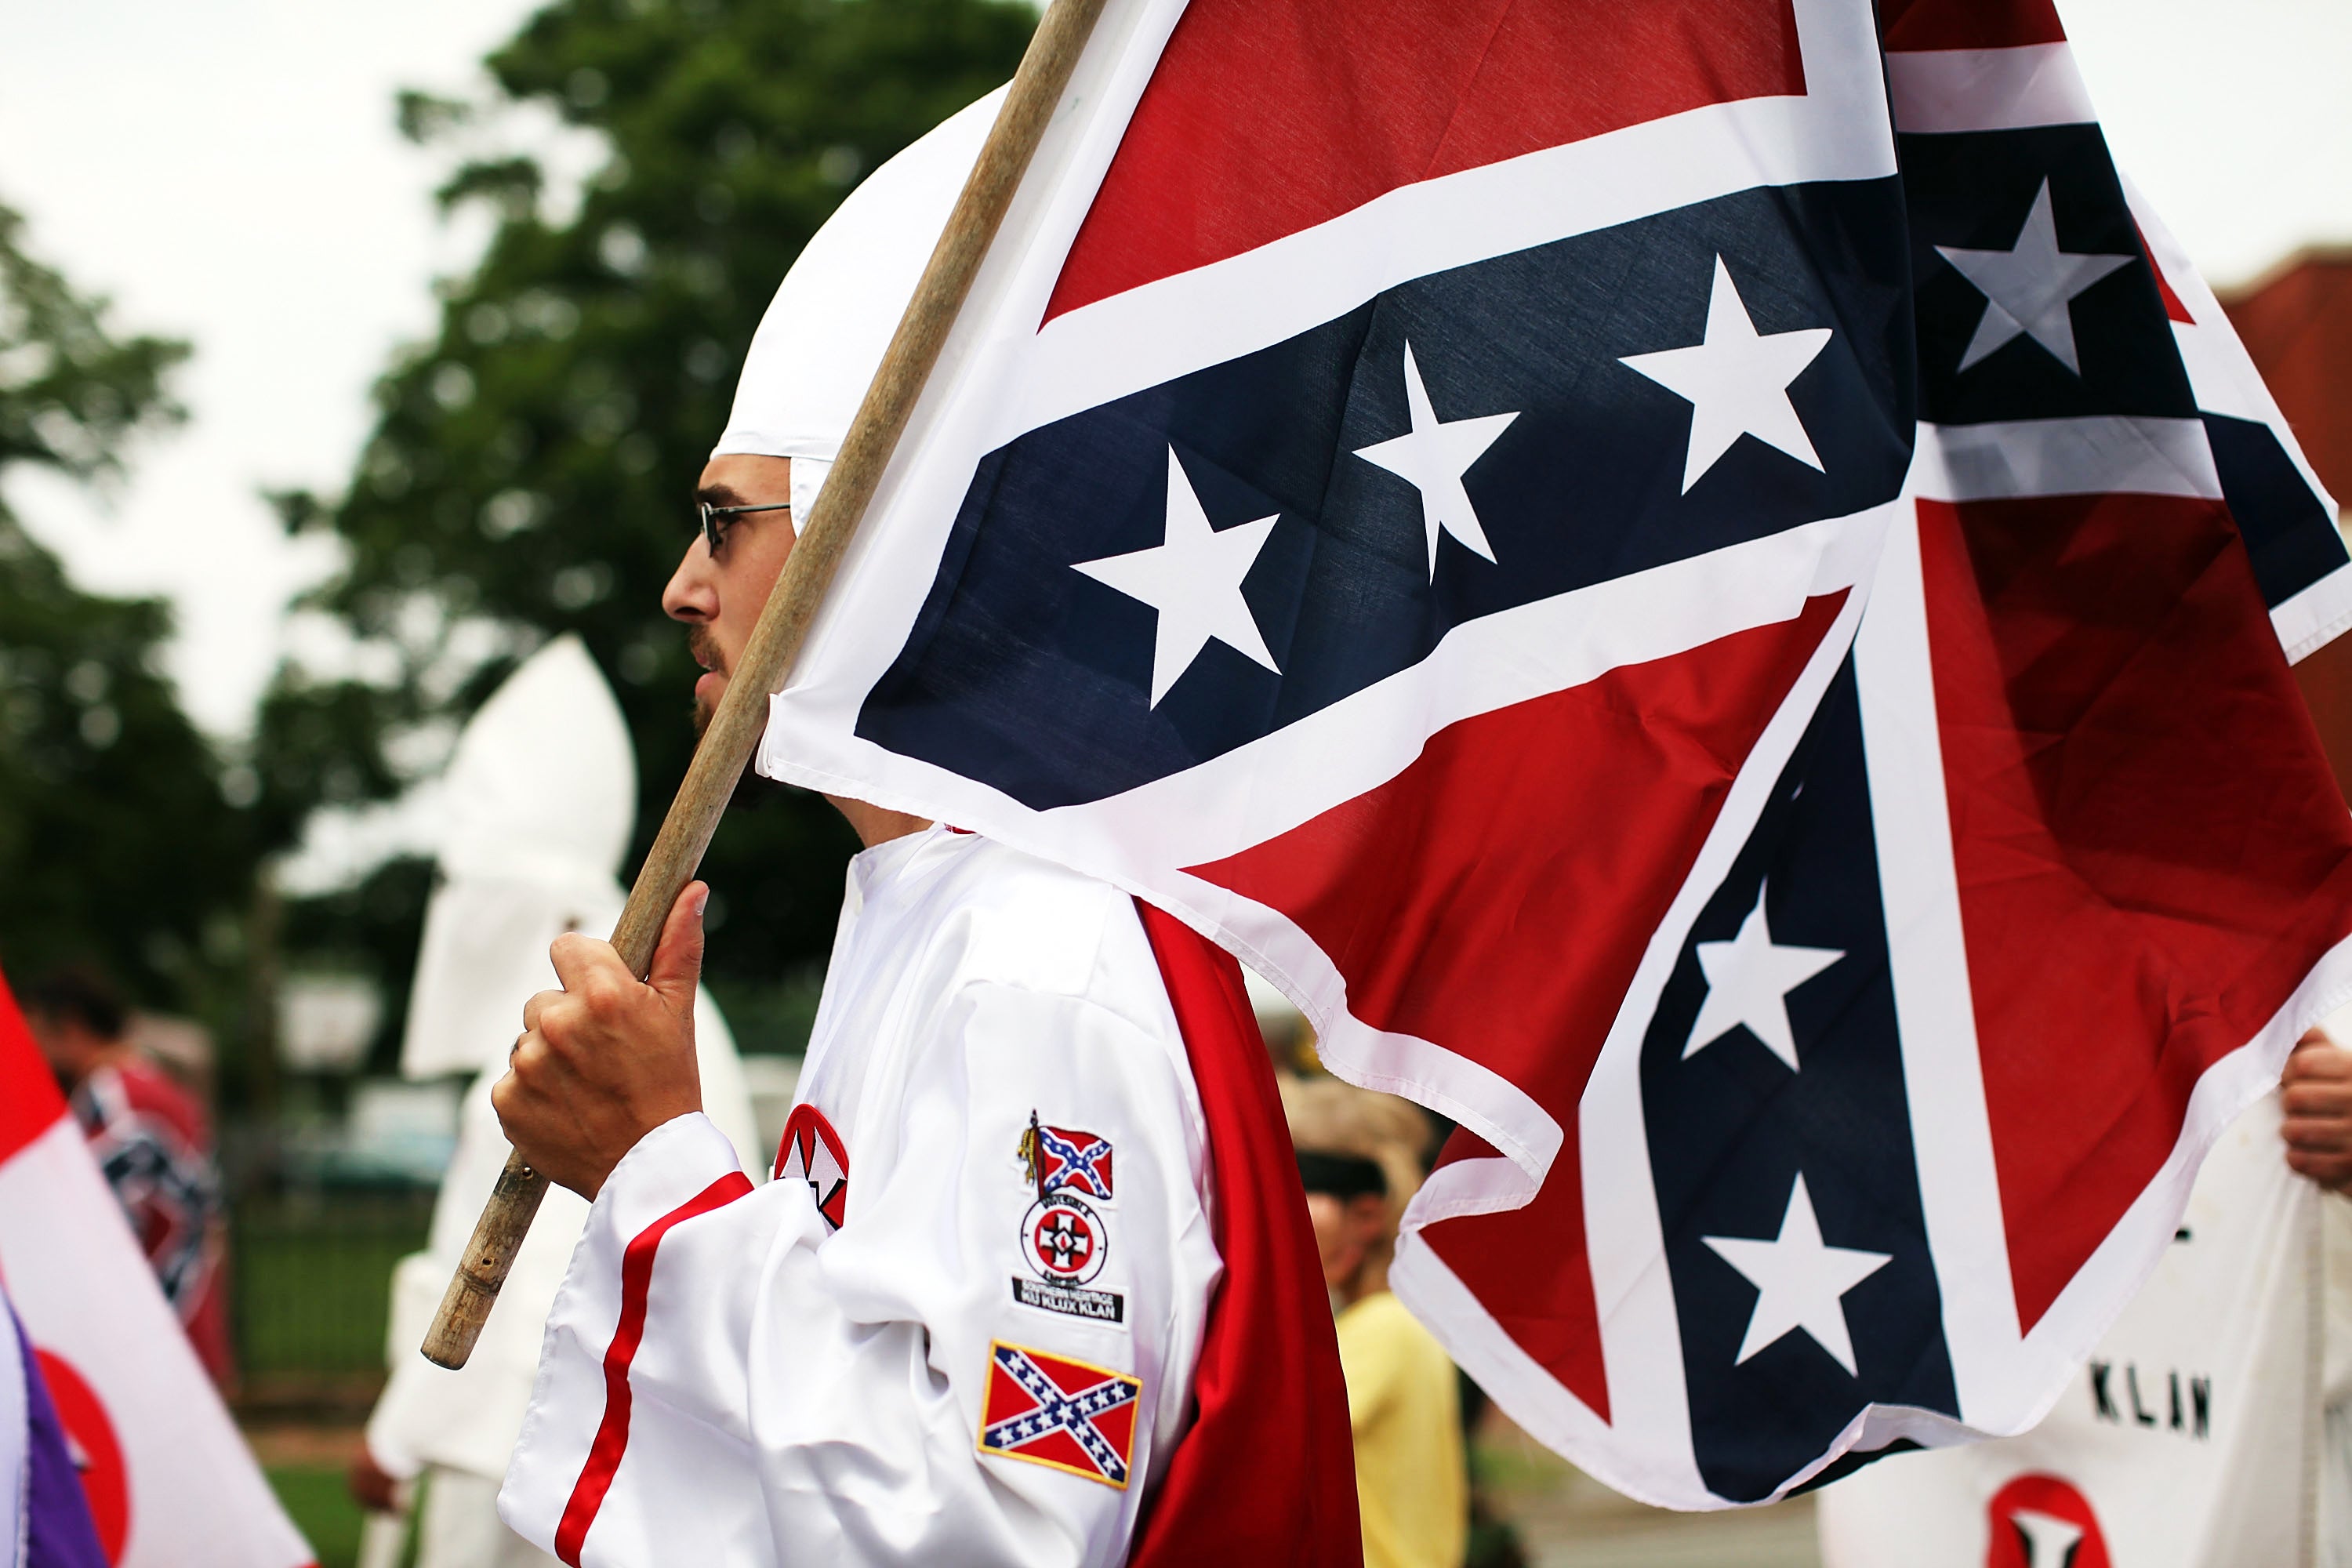 A&E Is Ditching Plans for Documentary Series on the KKK